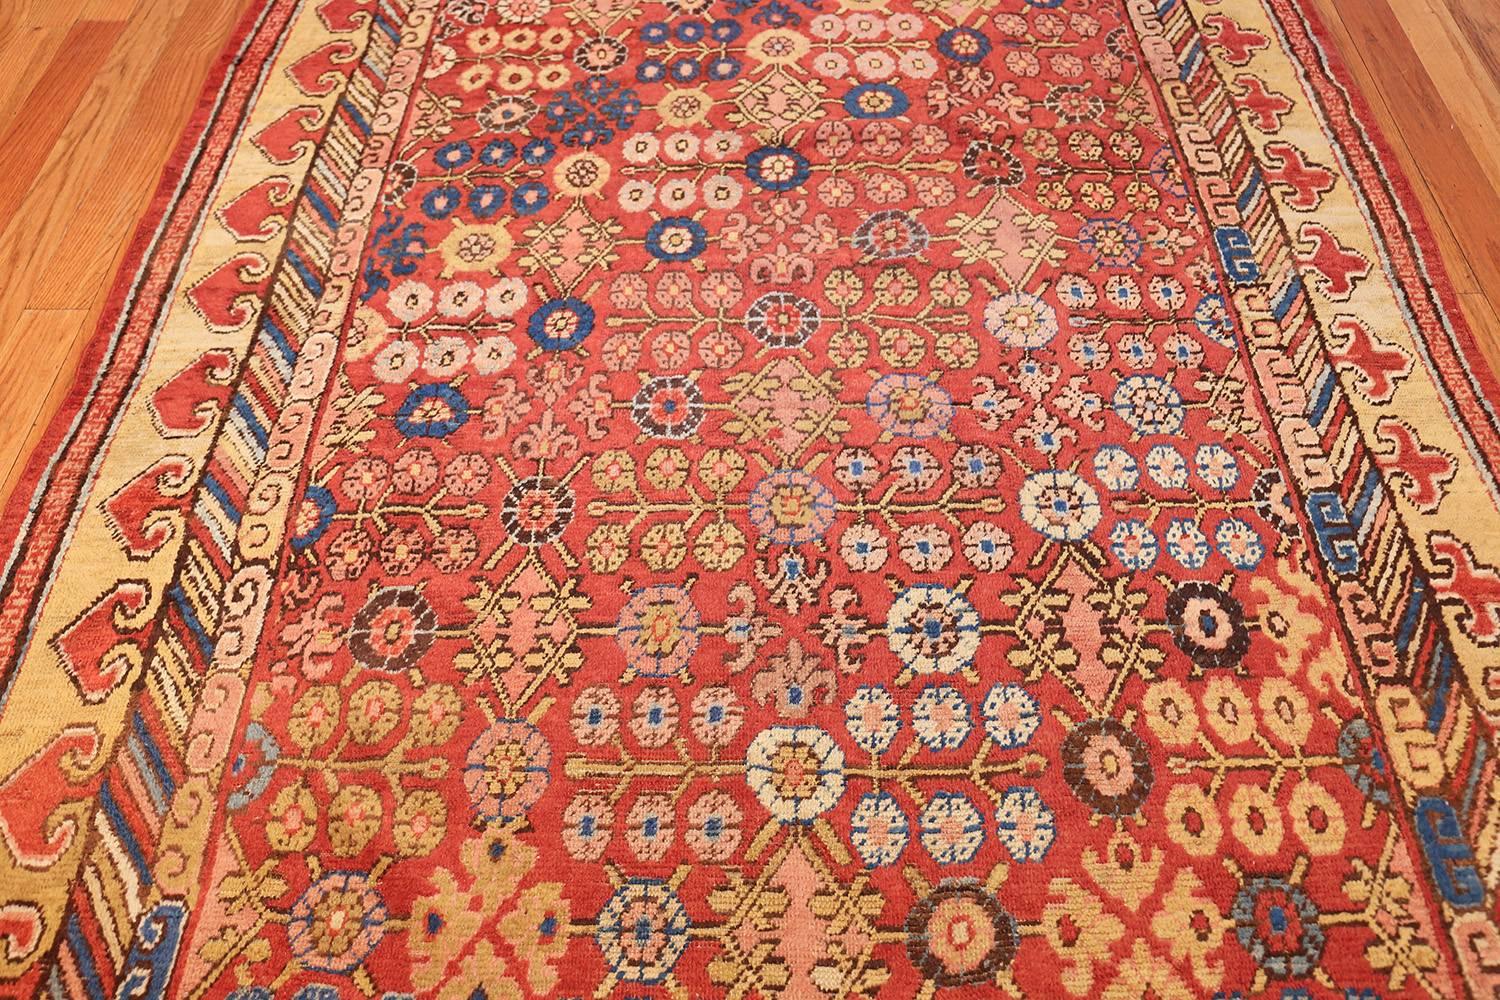 Wool Nazmiyal Collection Antique 18th Century Khotan Rug. 5 ft 6 in x 8 ft 9 in 